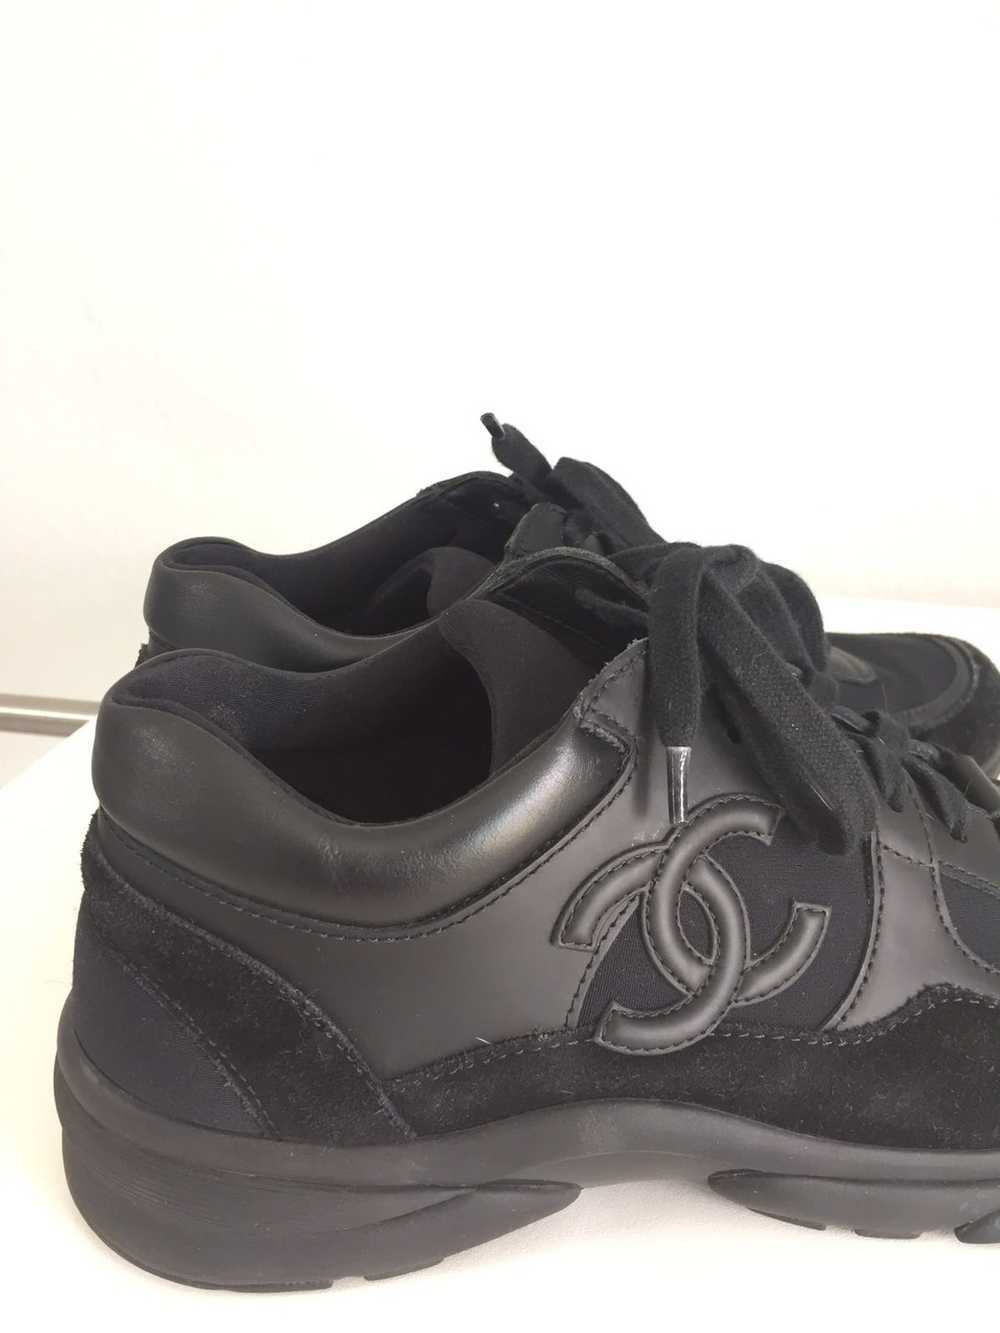 Chanel Chanel Sneakers - image 4